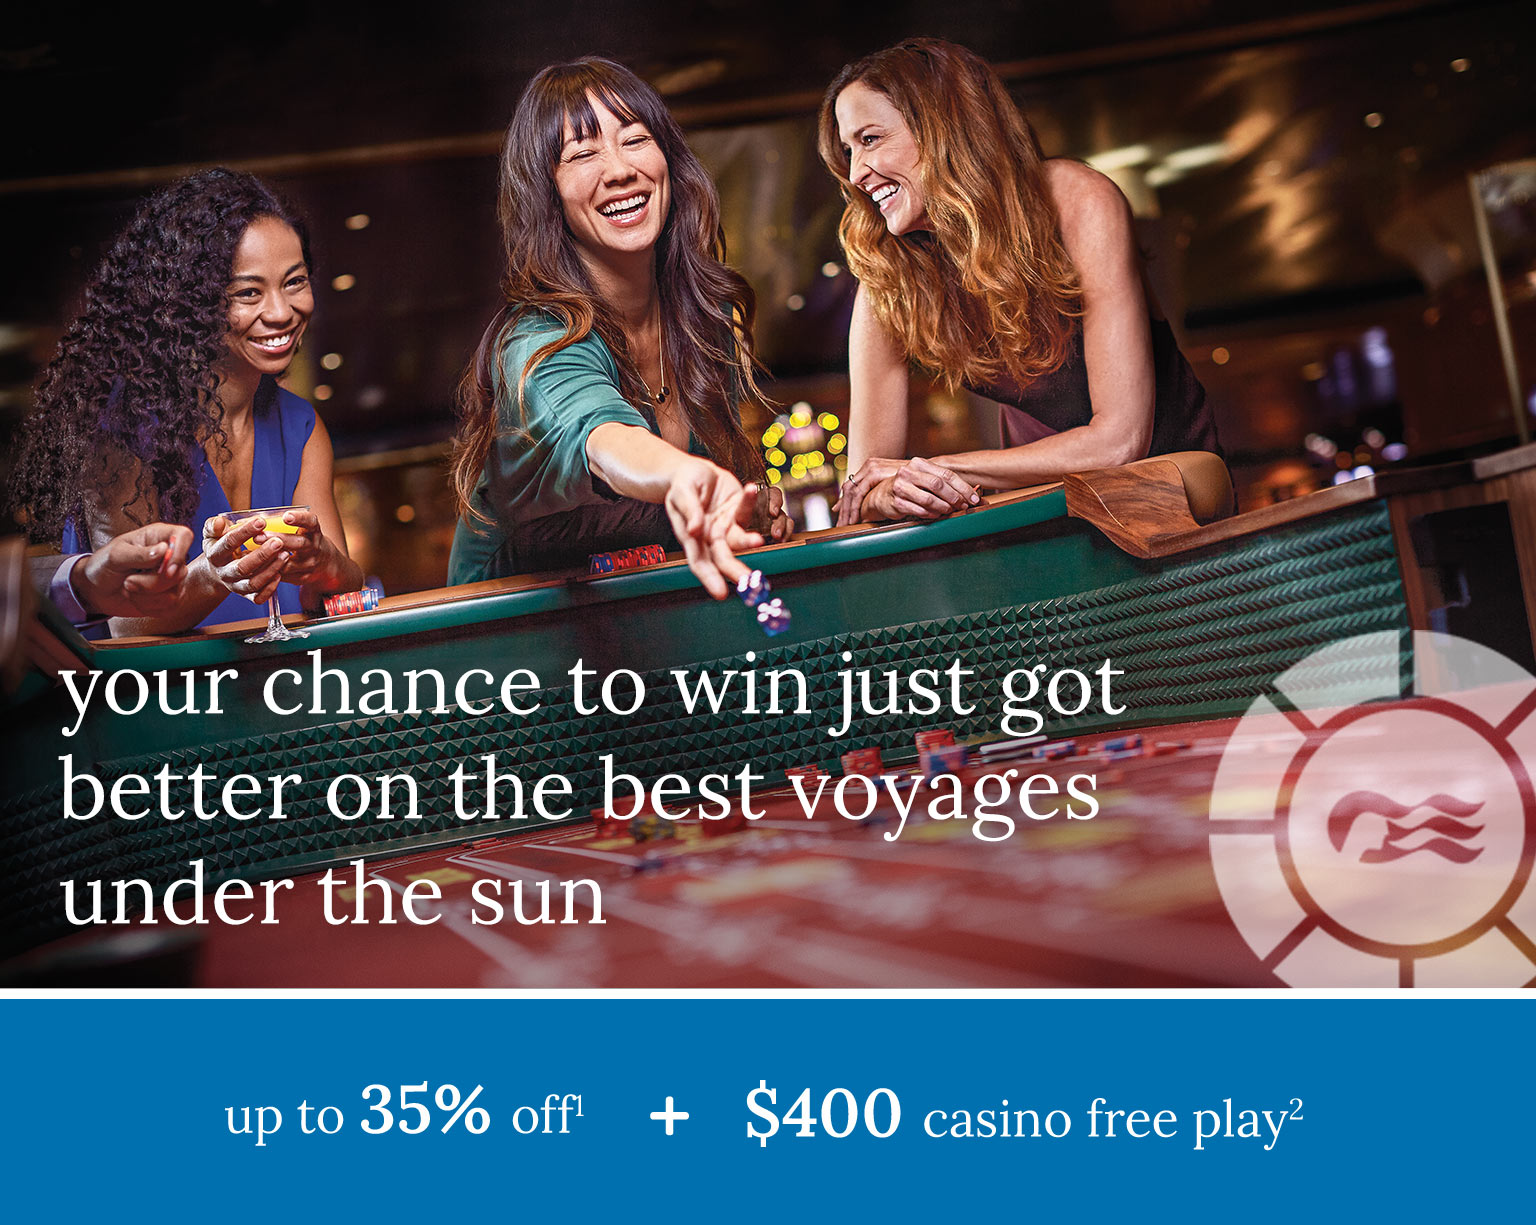 A man and a woman cheer at the slot machines - Princess Players Club Getaways - Don't give up a lucky hand, book your 2021 getaway! - free balcony stateroom + $1000 casino free play + princess plus+ included^